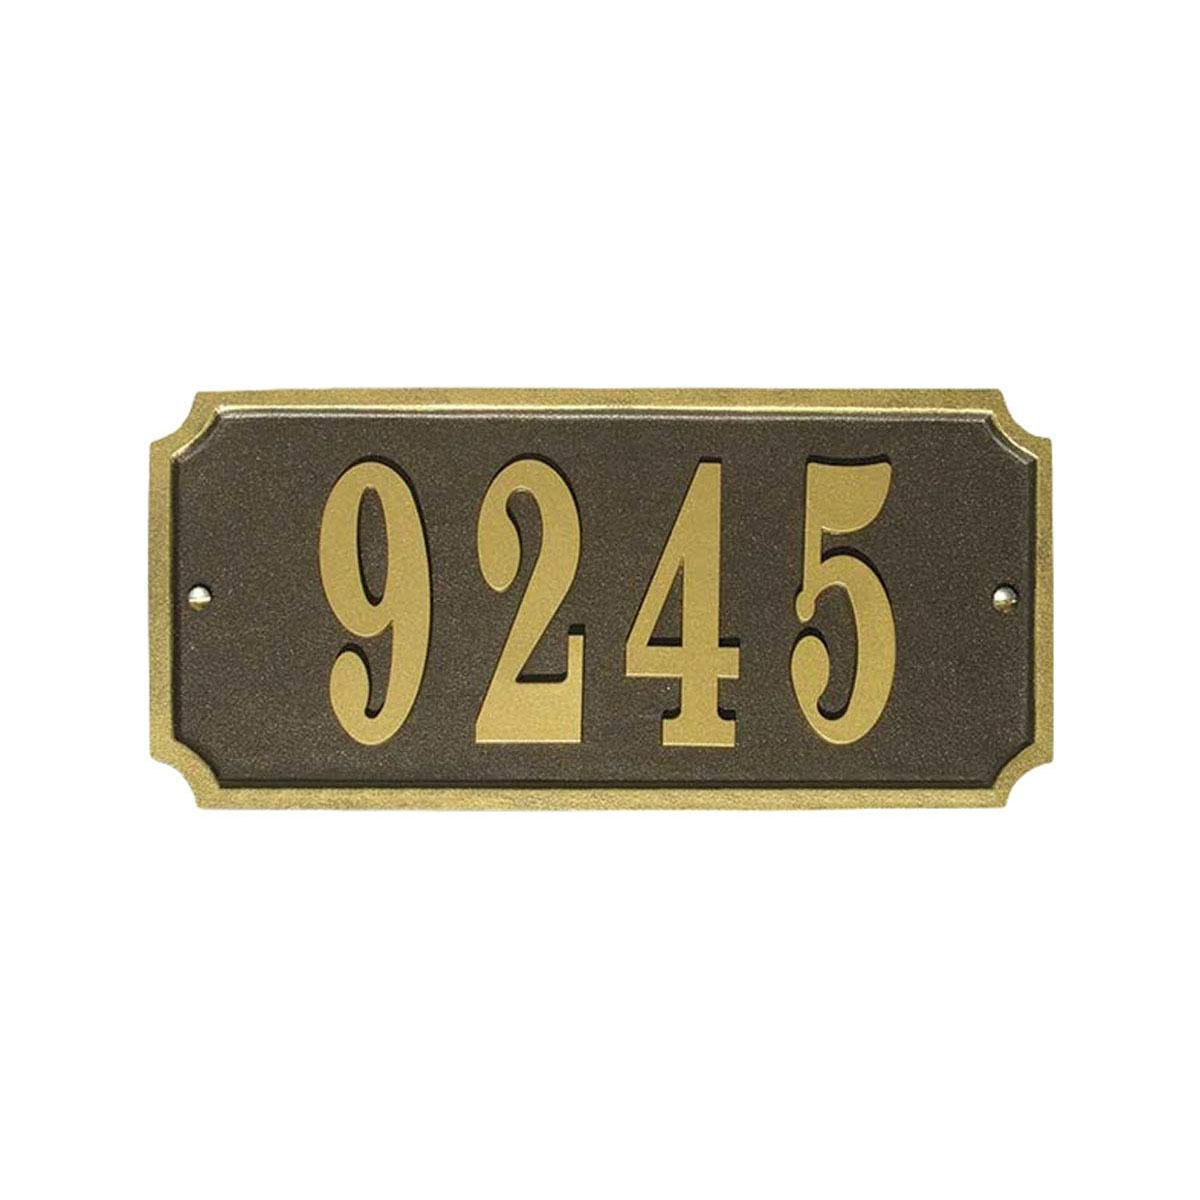 Waterford Rectangle Cast Aluminum Bronze With Gold Border Address Plaque